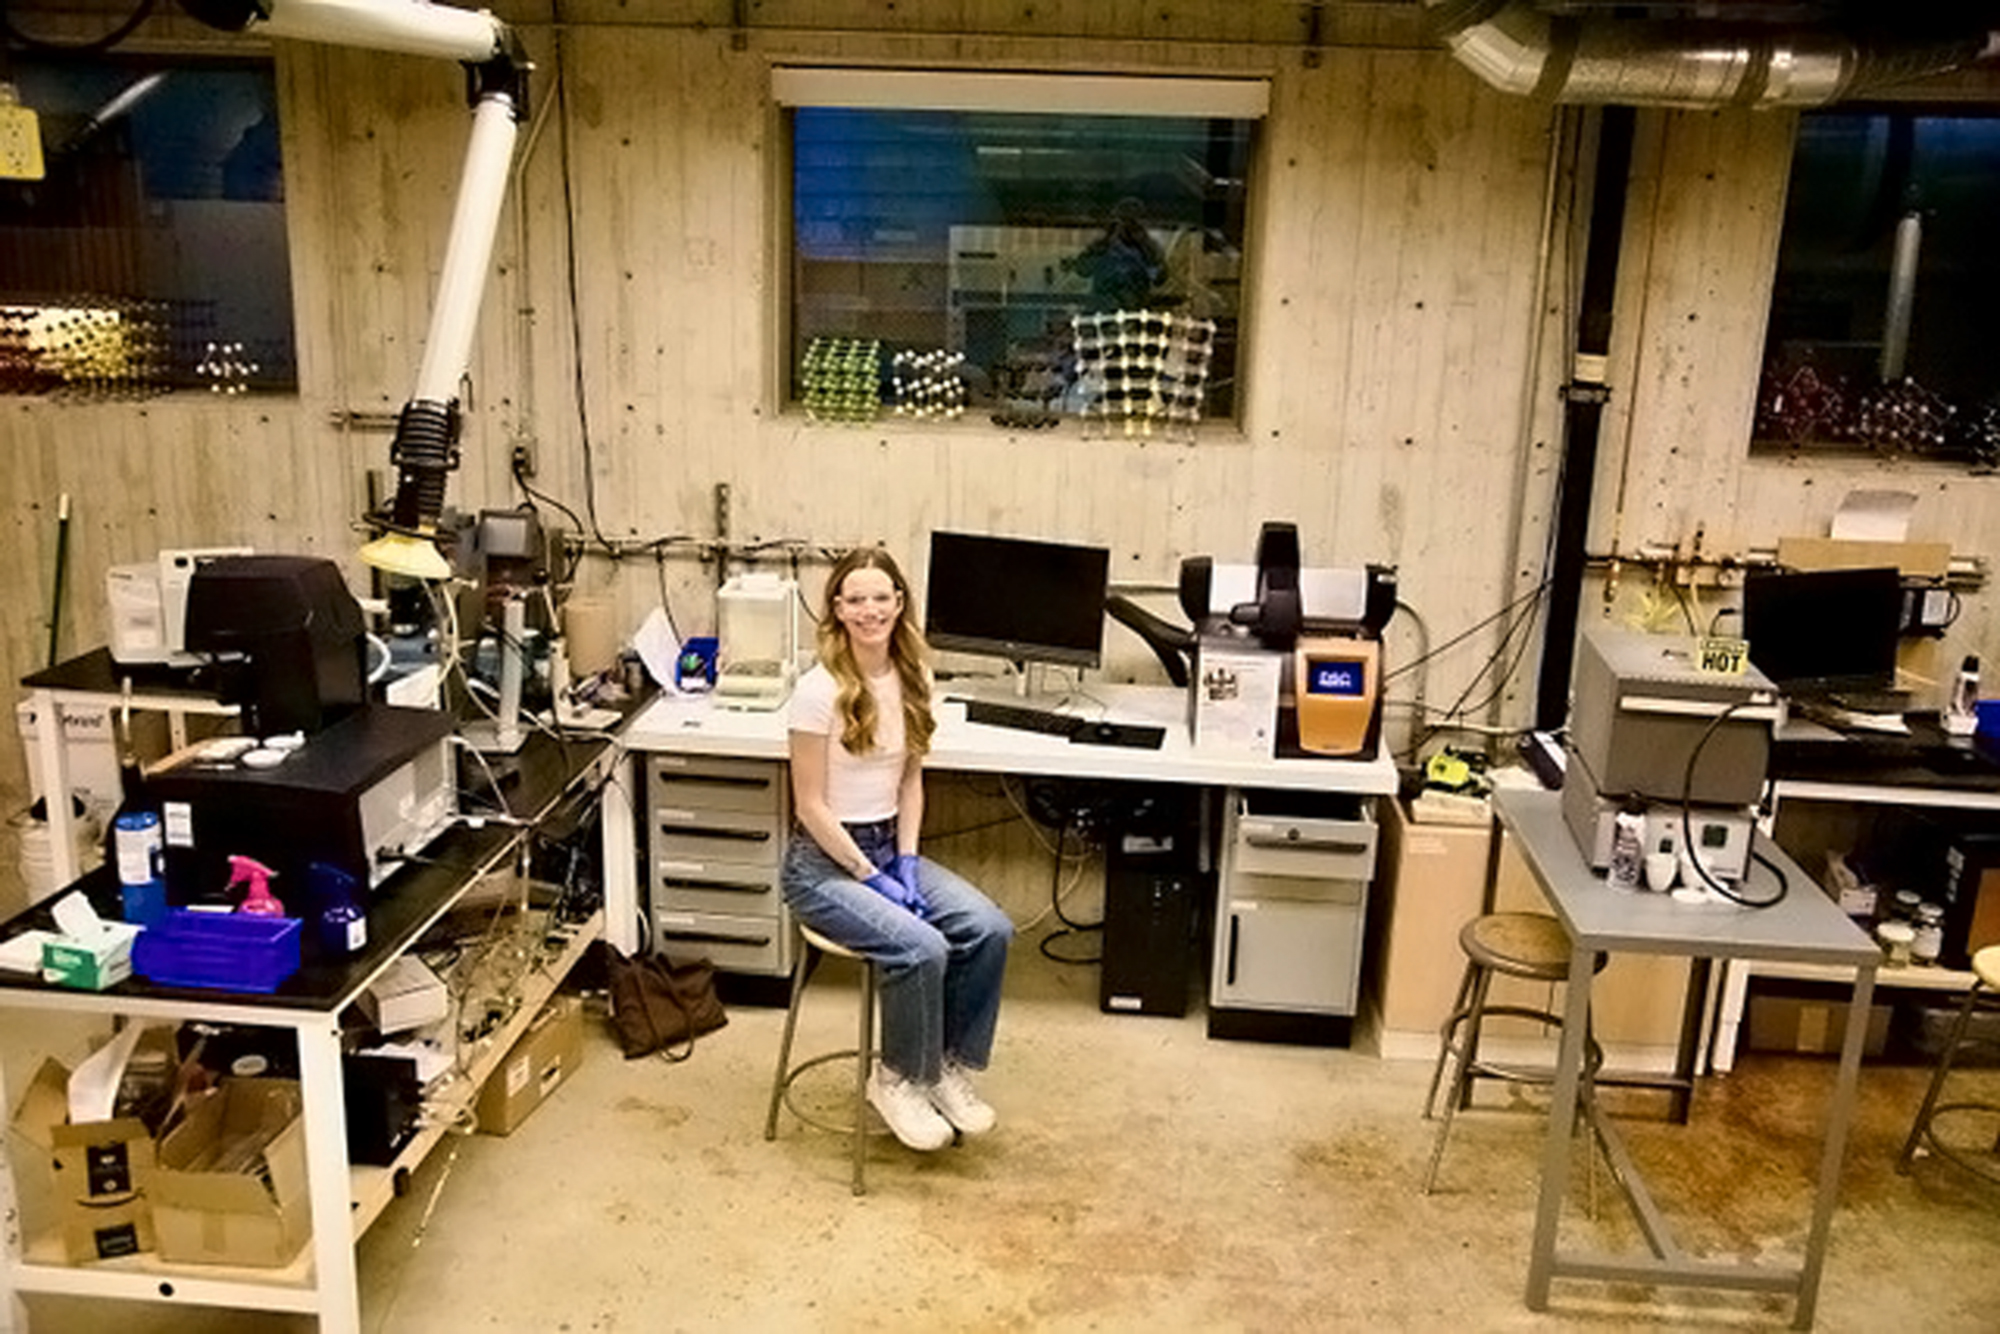 A student sits in the middle of a scientific laboratory, surrounded by equipment